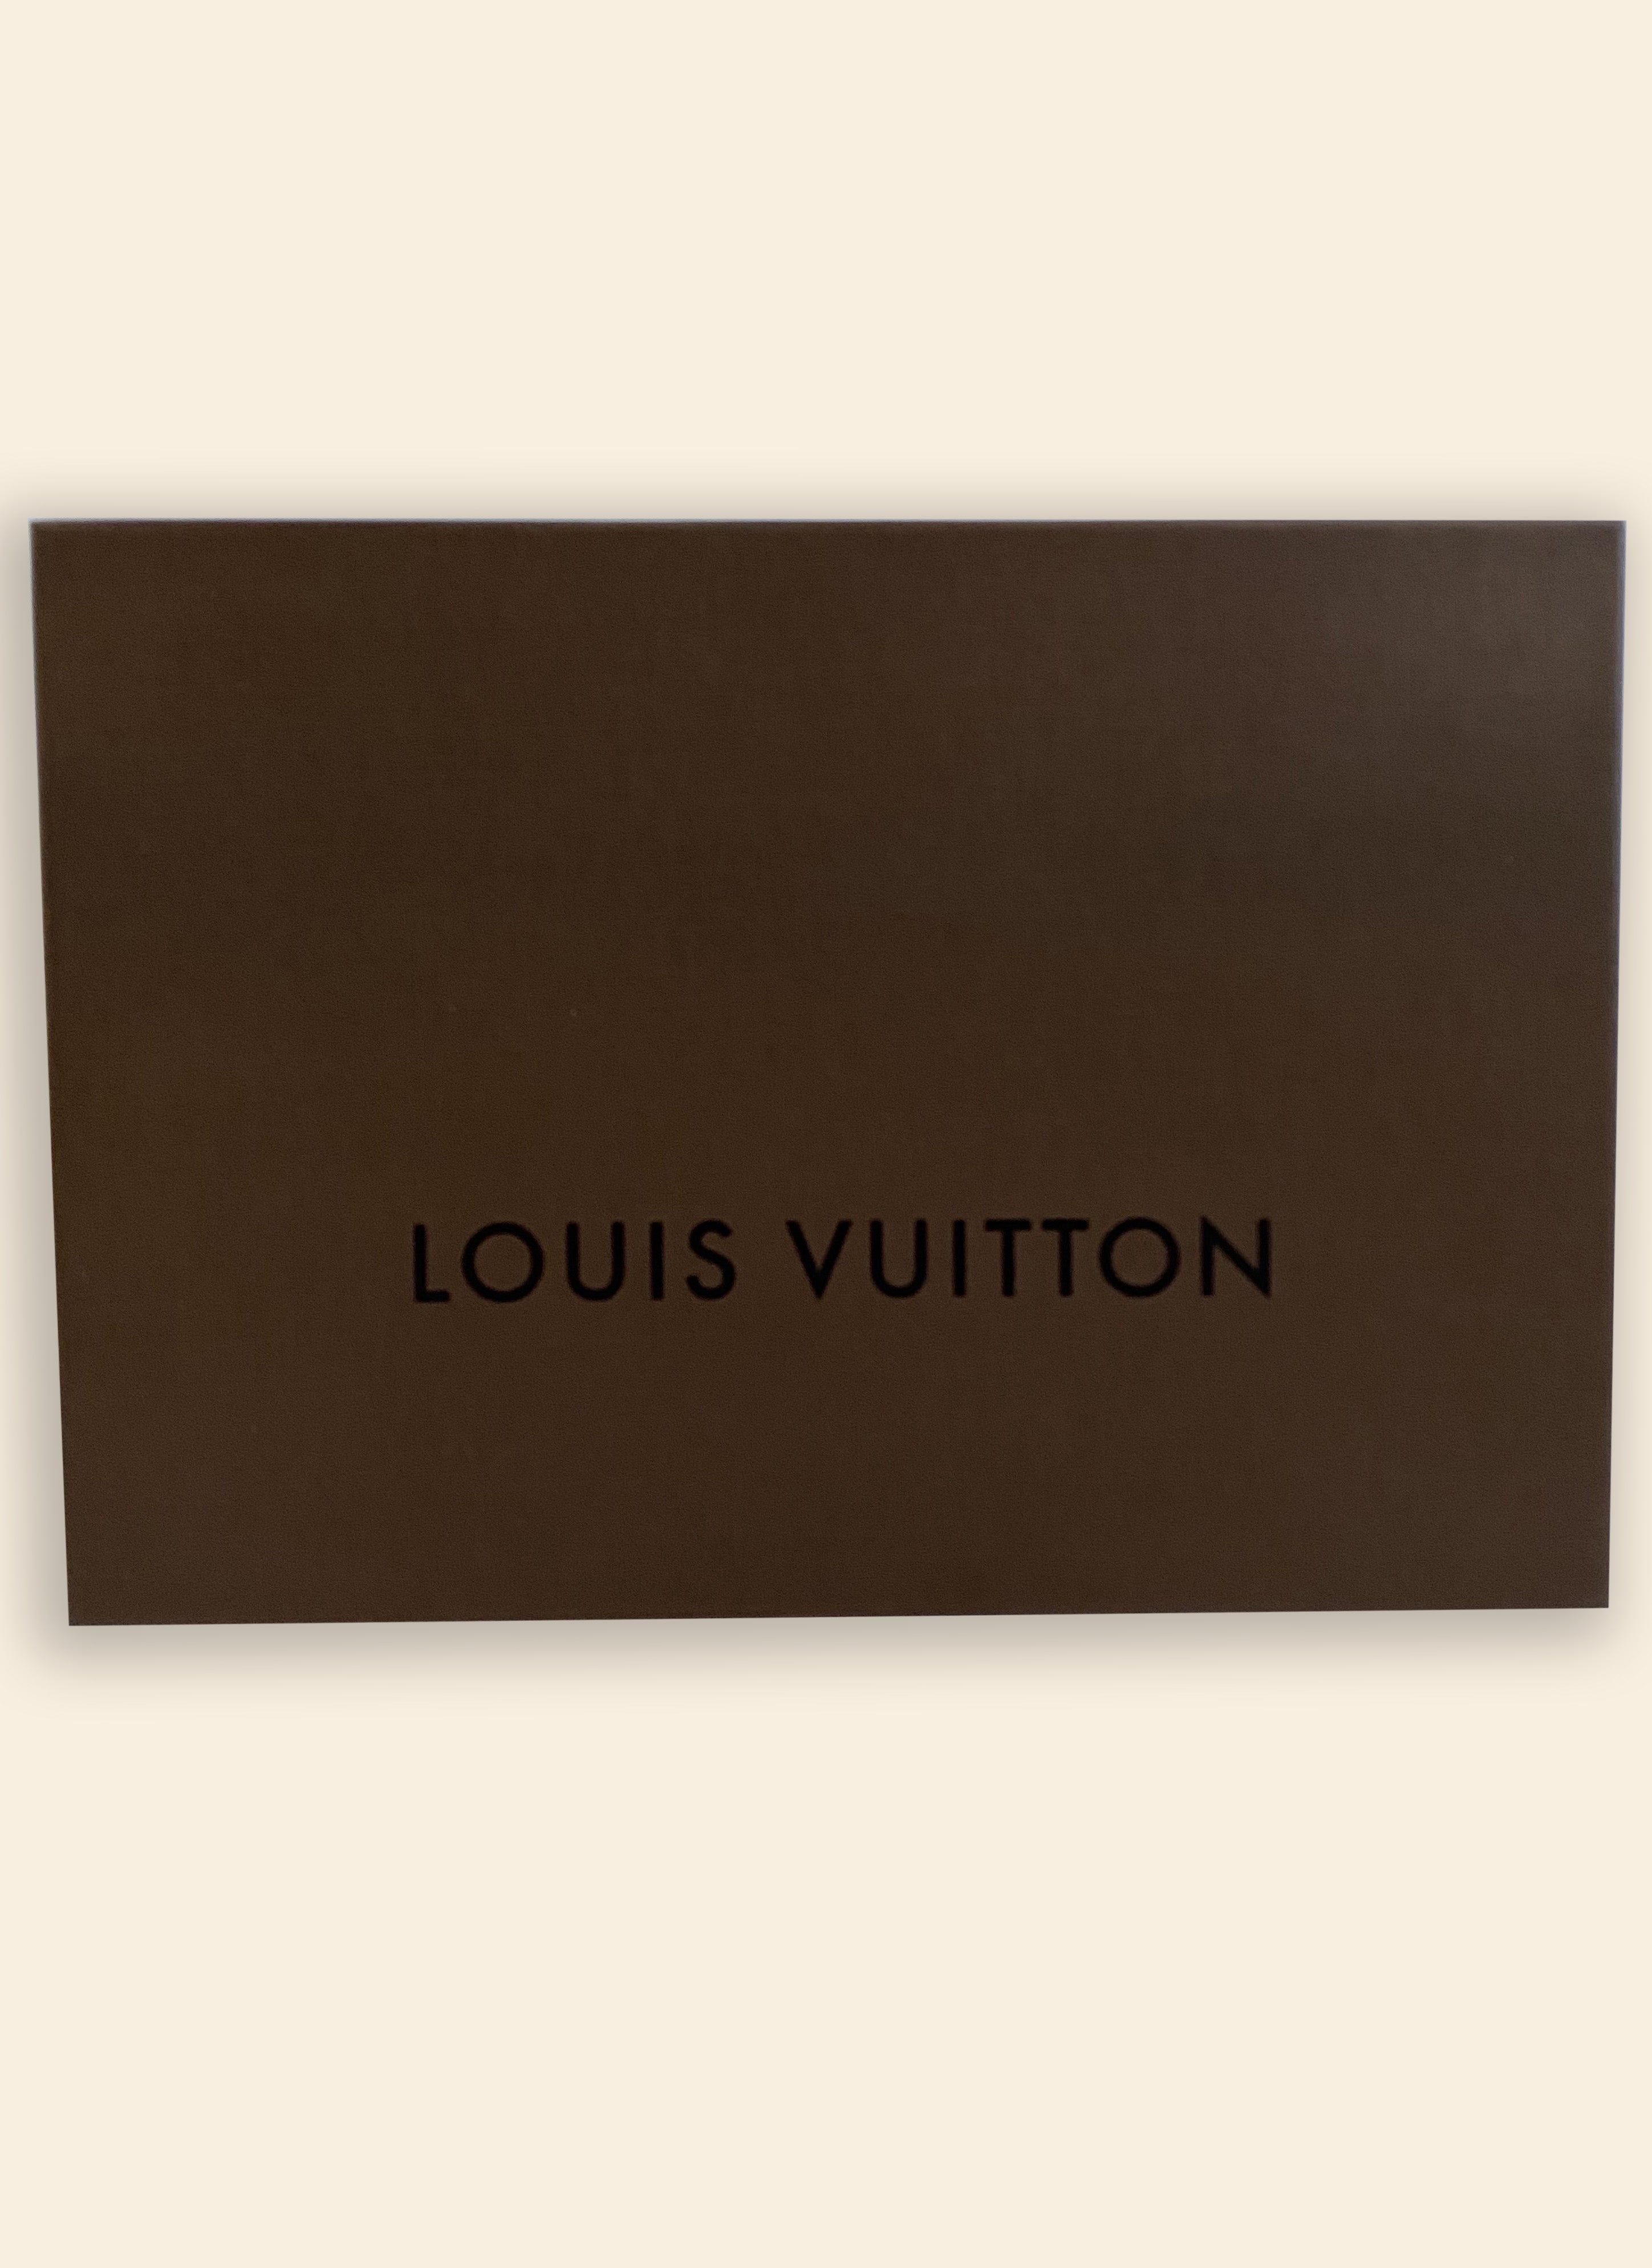 Louis Vuitton | Architectures And Interiors